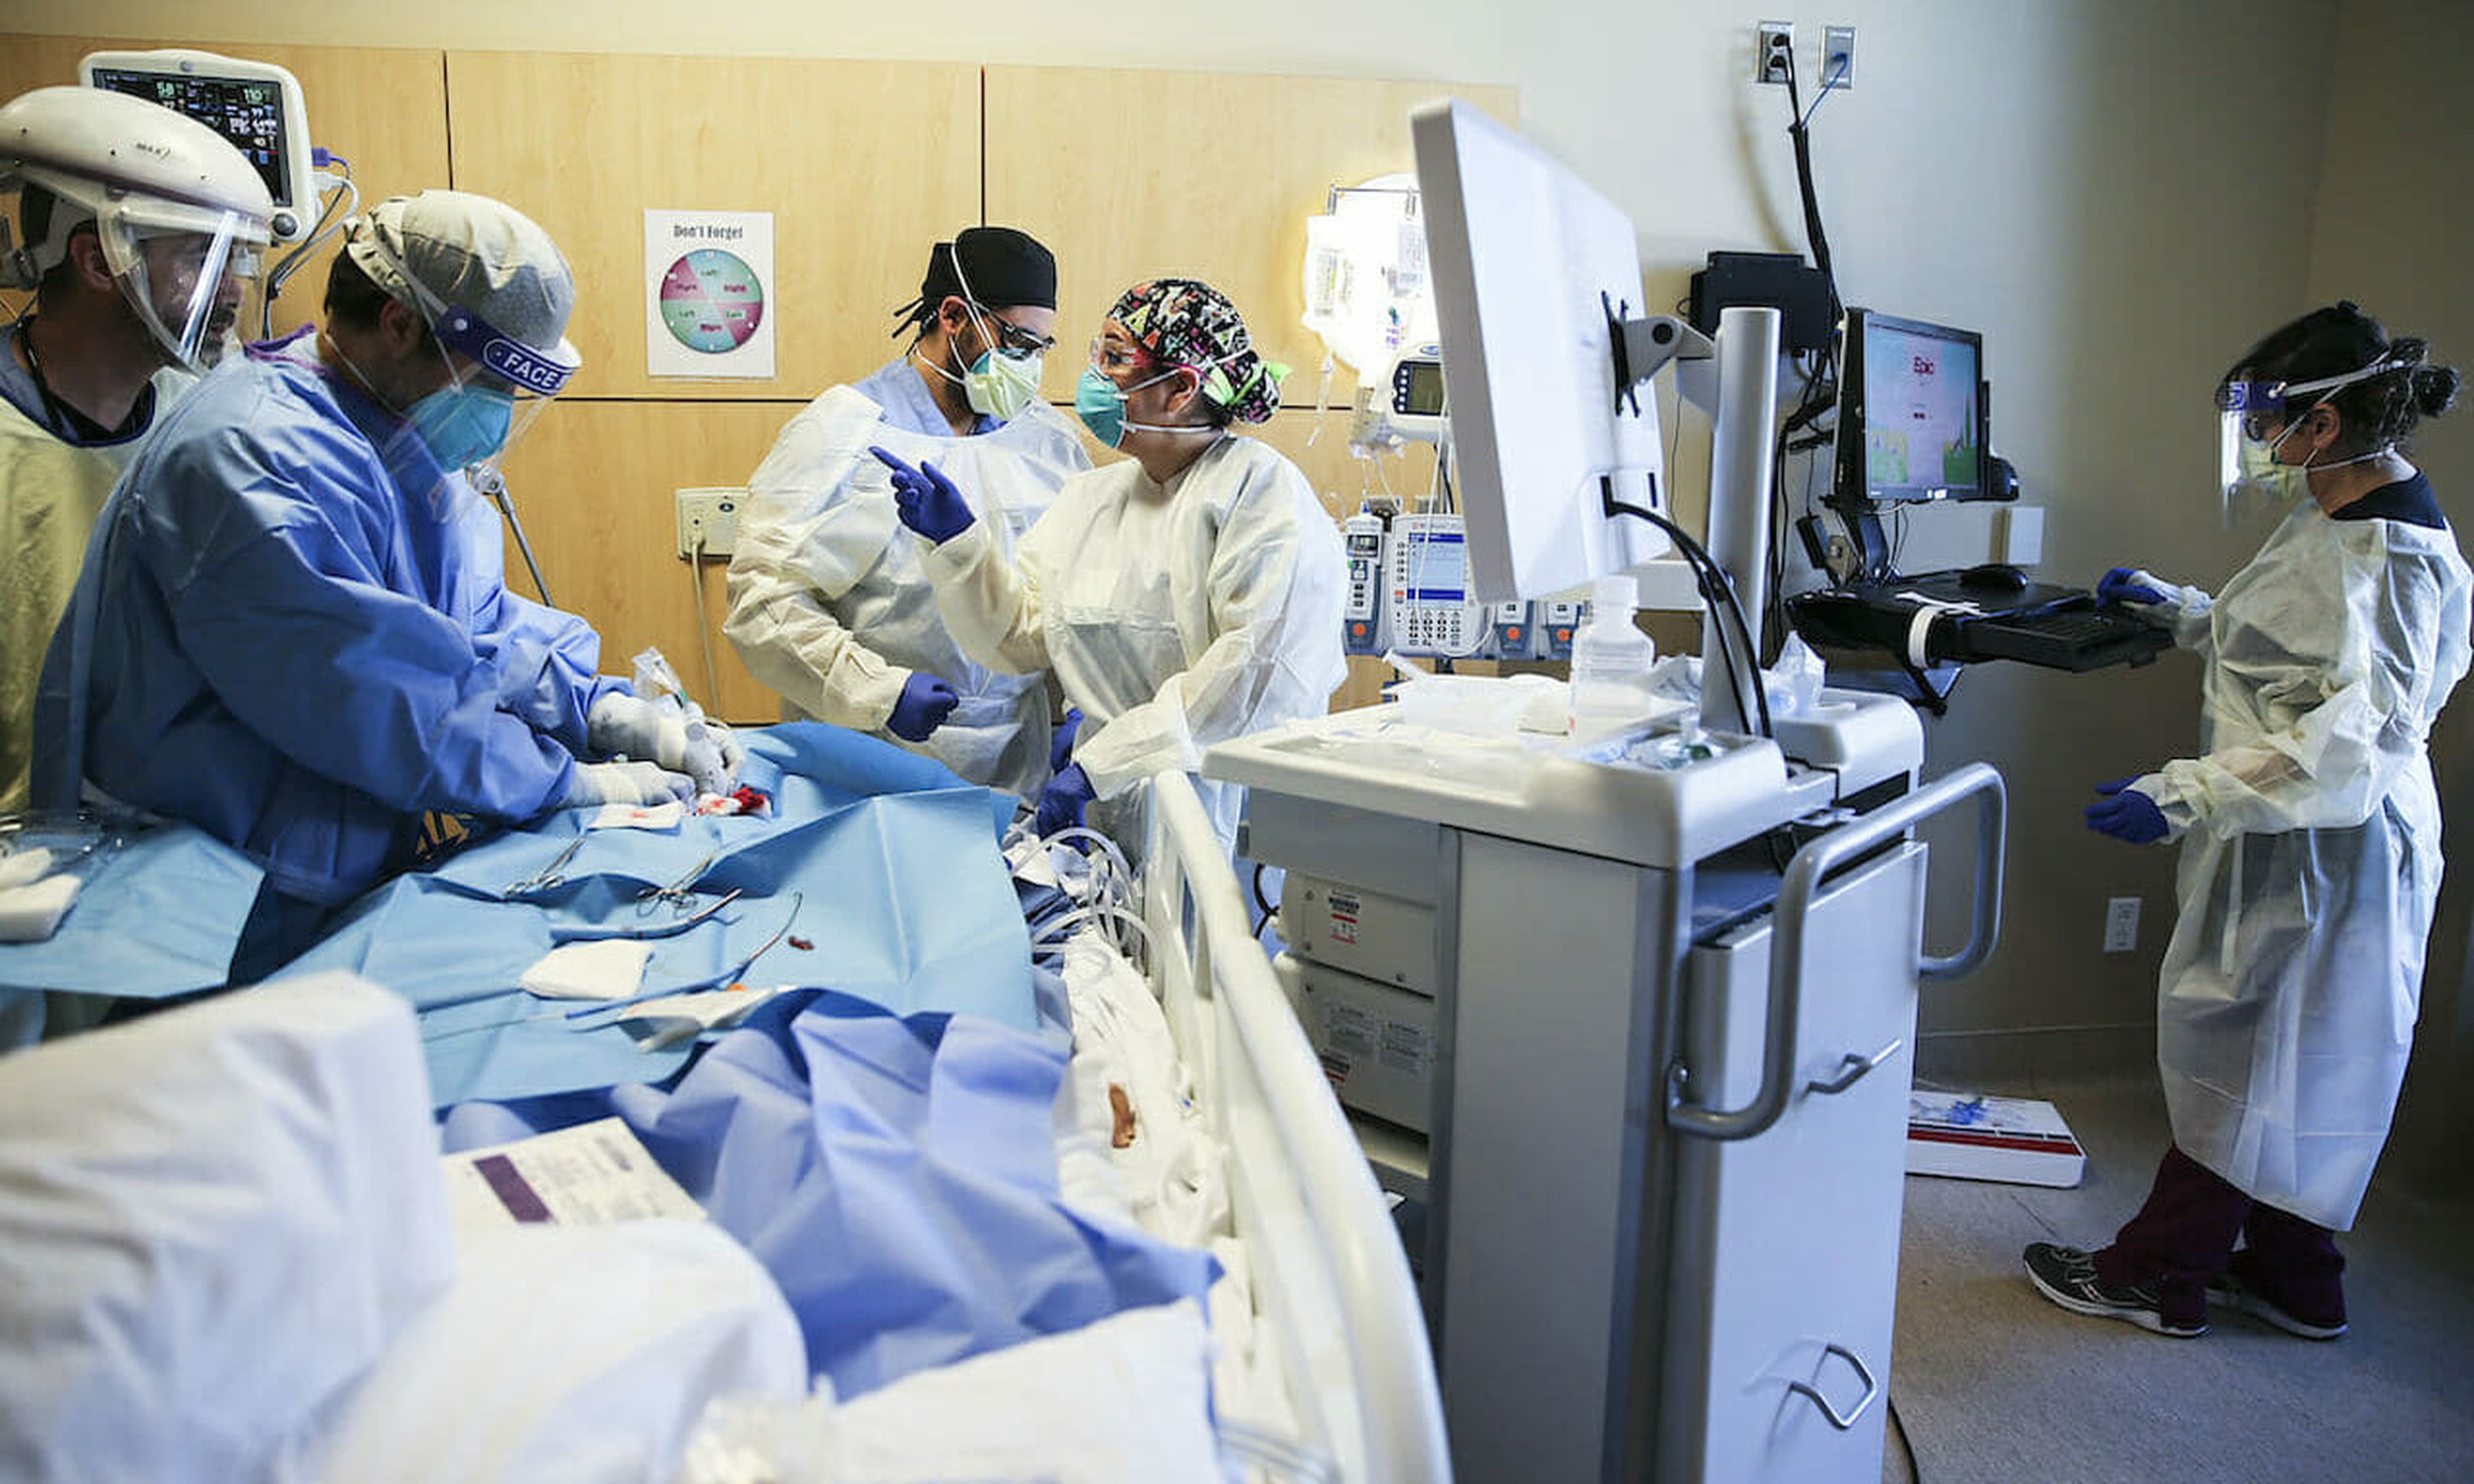 Clinicians perform a tracheostomy on a patient in a COVID-19 ICU Intensive Care Unit in Los Angeles. In the wake of the SolarWinds incident, an increasing number of health care institutions are embarking on threat-hunting missions to seek and destroy exploitable vulnerabilities. (Photo by Mario Tama/Getty Images)